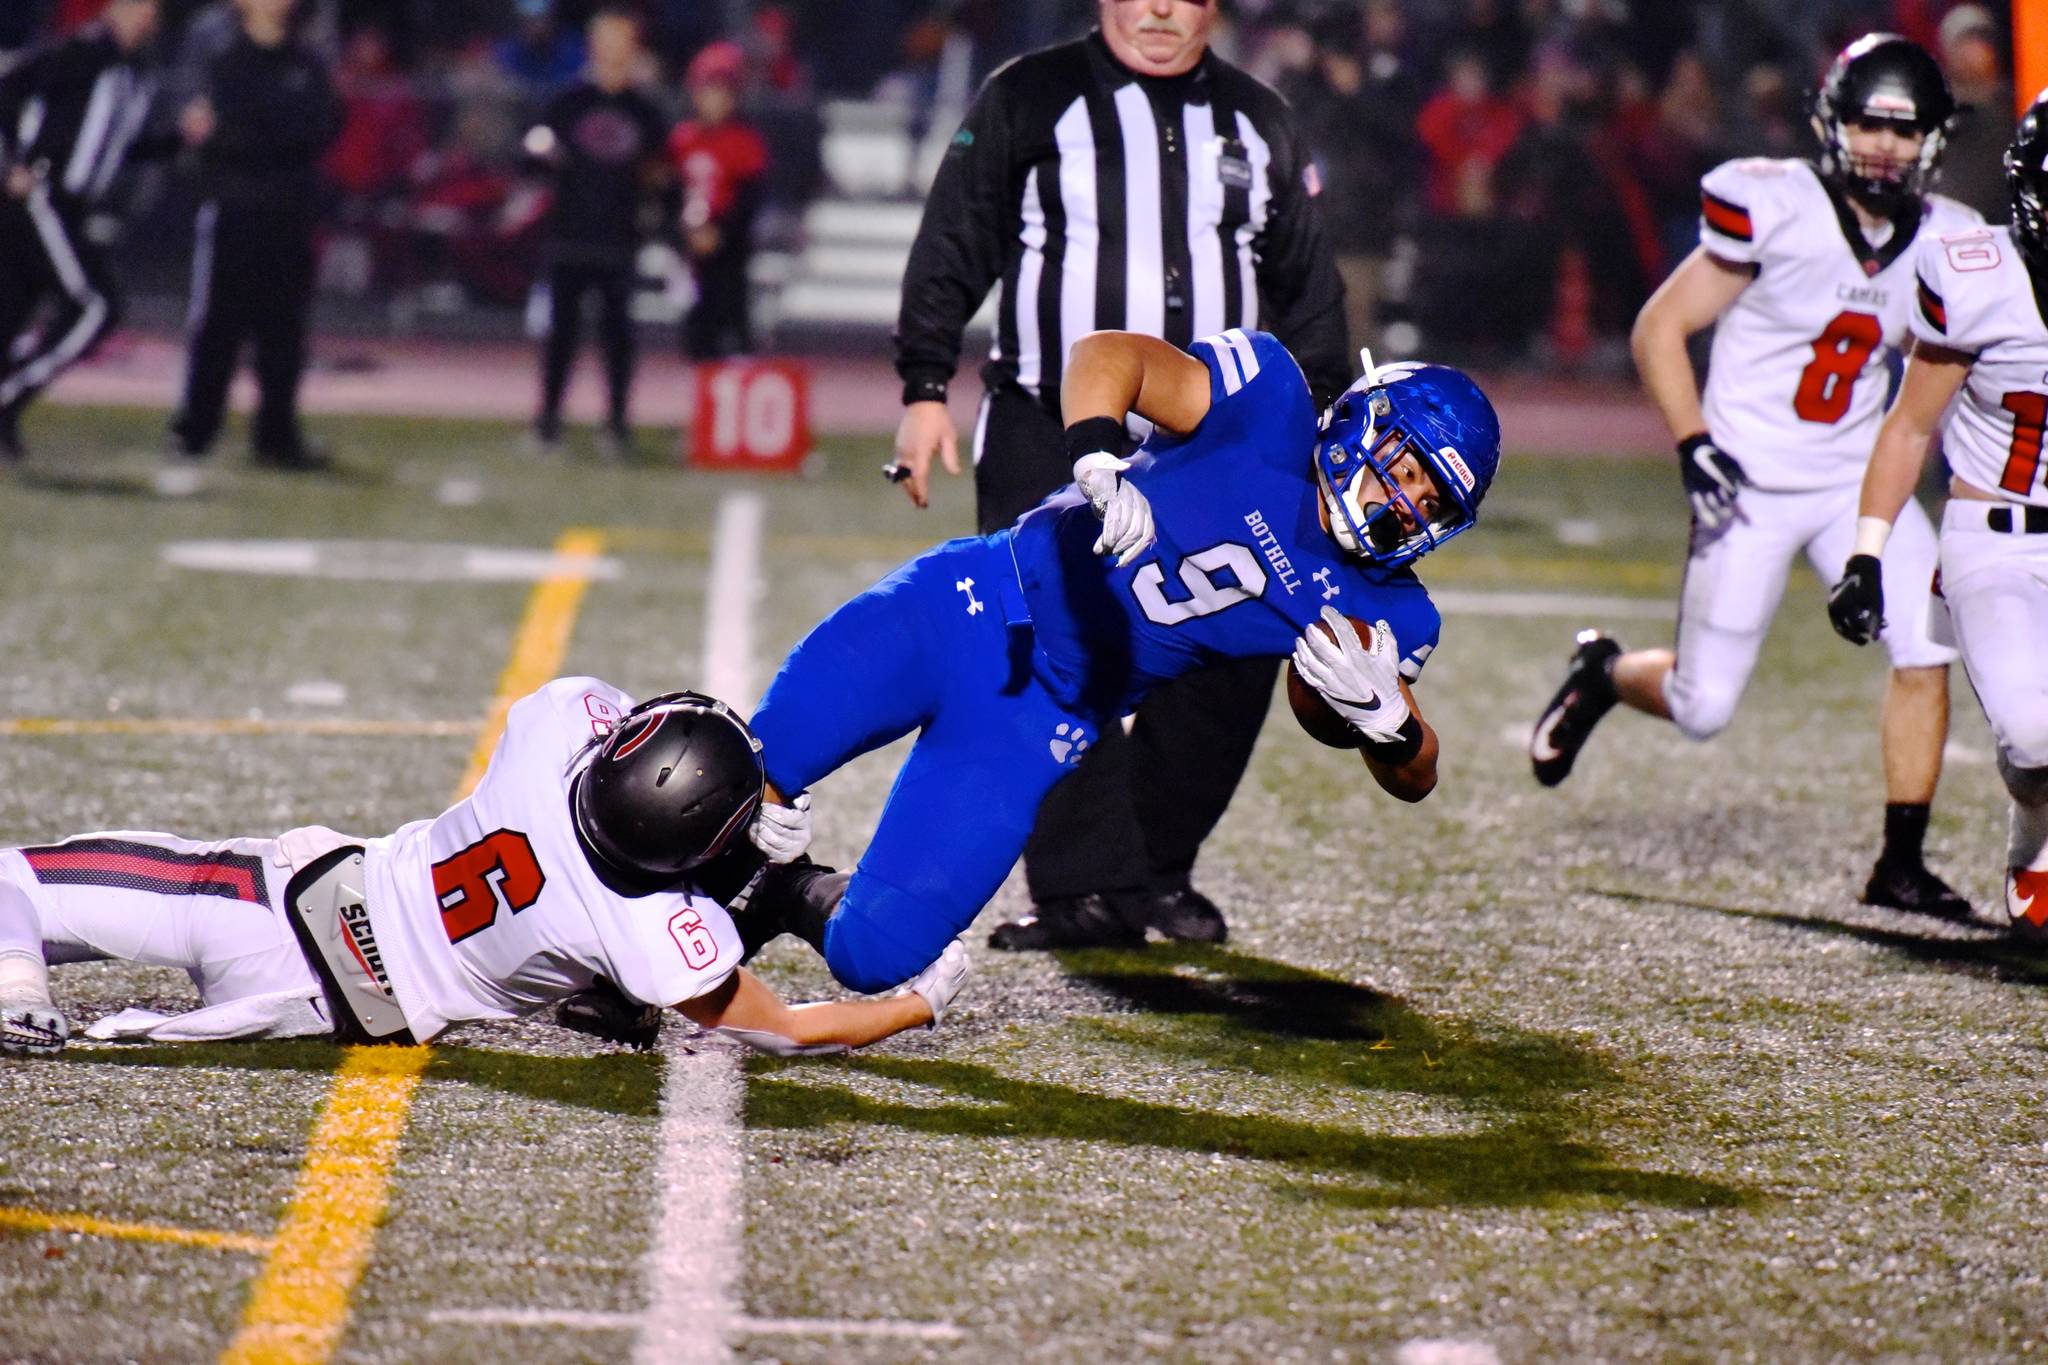 Tala Tevaga lunges for some extra yardage as Camas’ Dante Humble grabs on for the ride. Photo courtesy of Greg Nelson